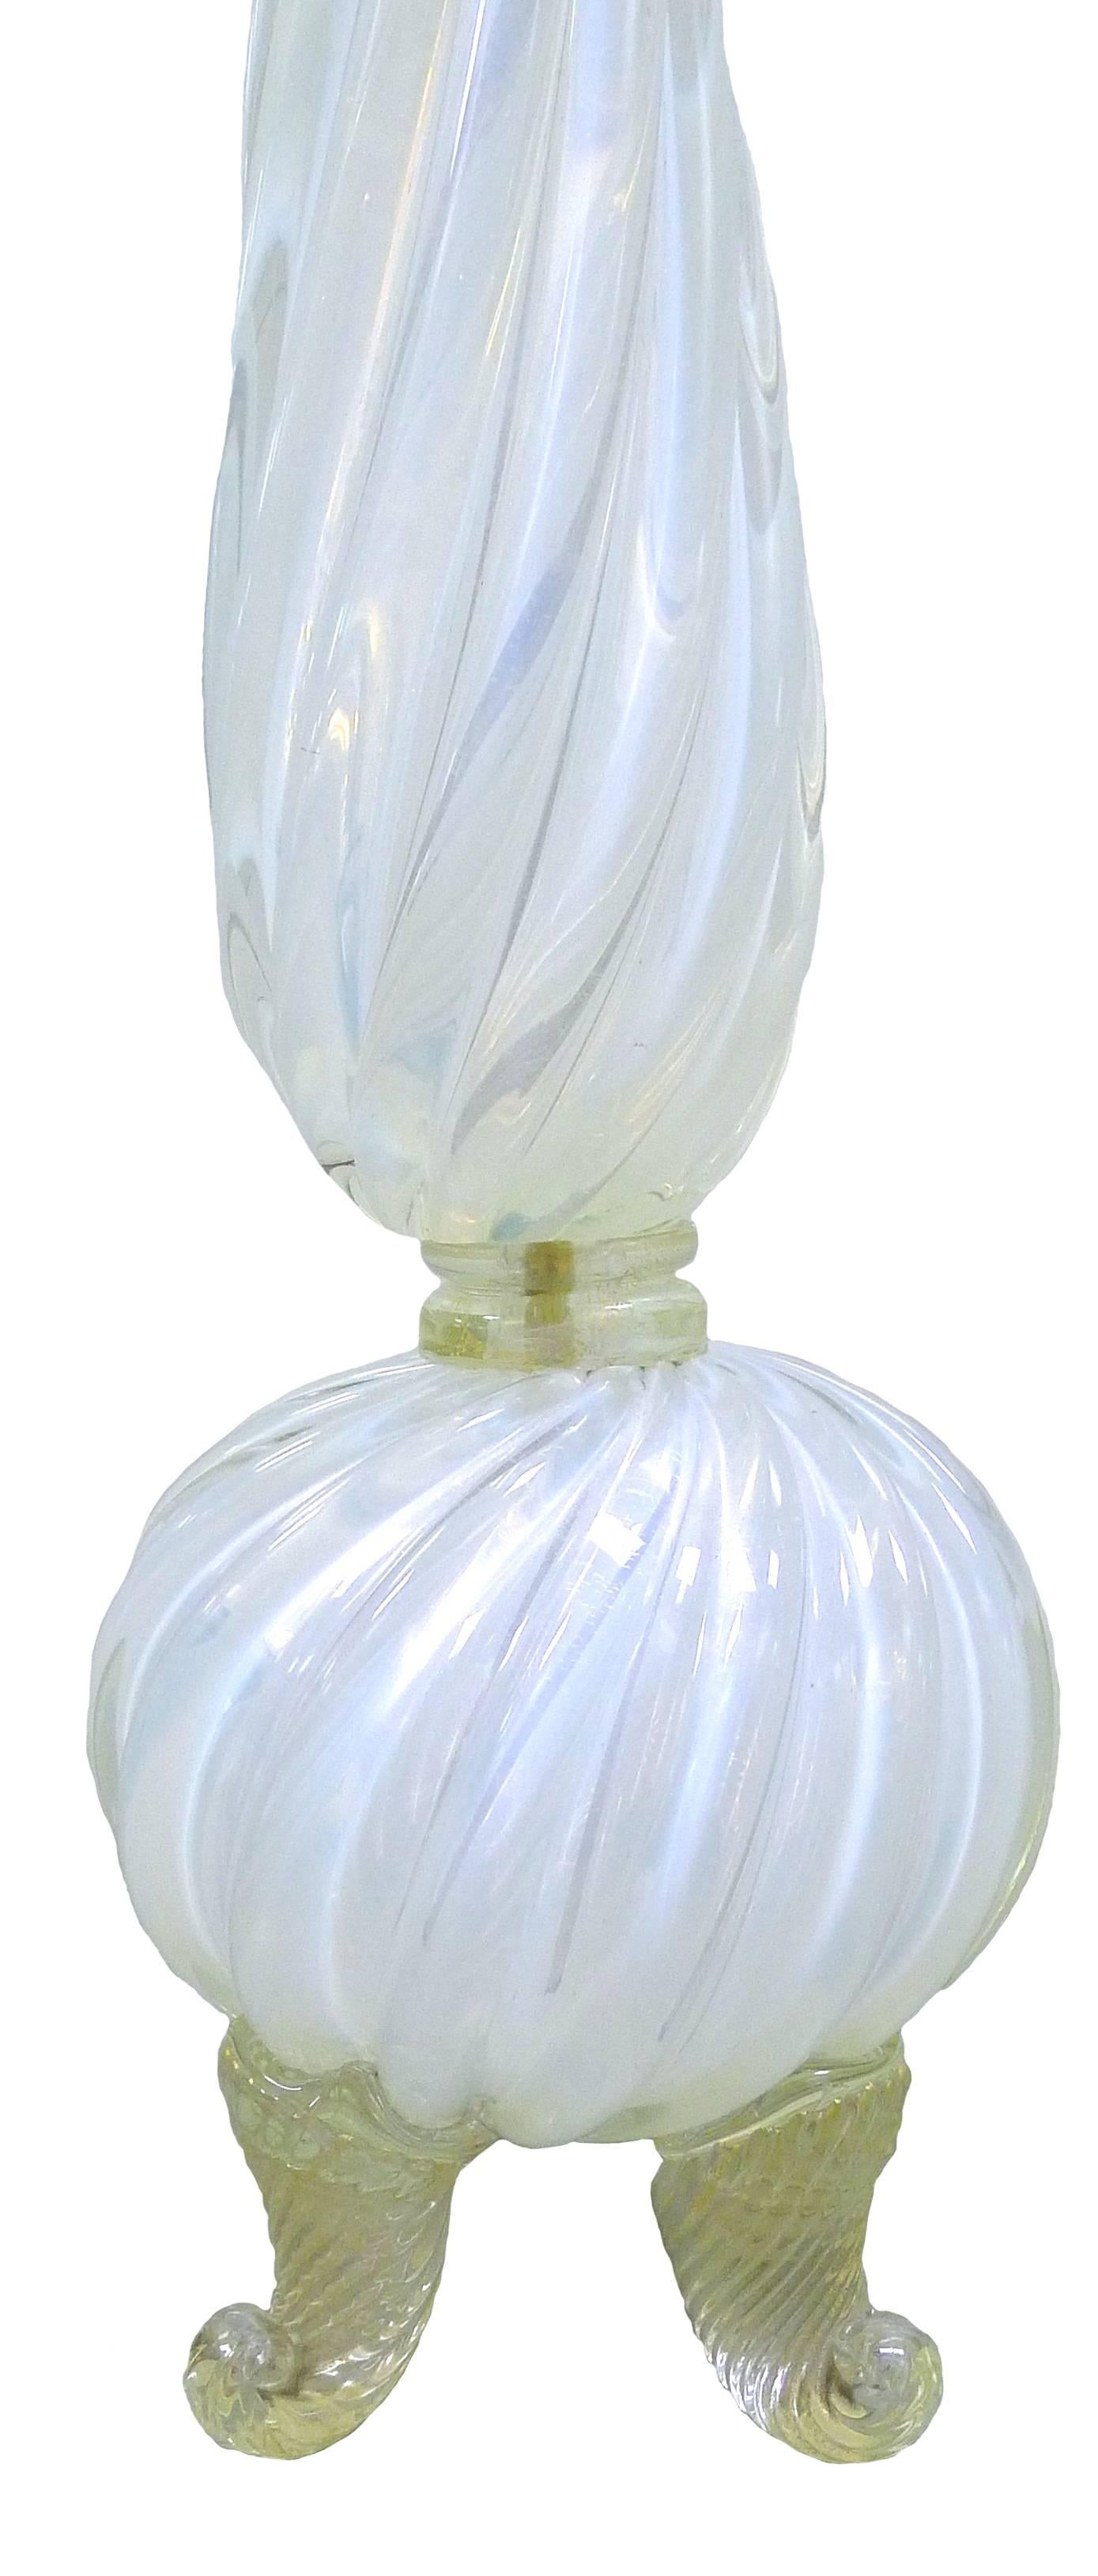 Hollywood Regency Pair of Mid-Century Opalescent Murano Glass Lamps